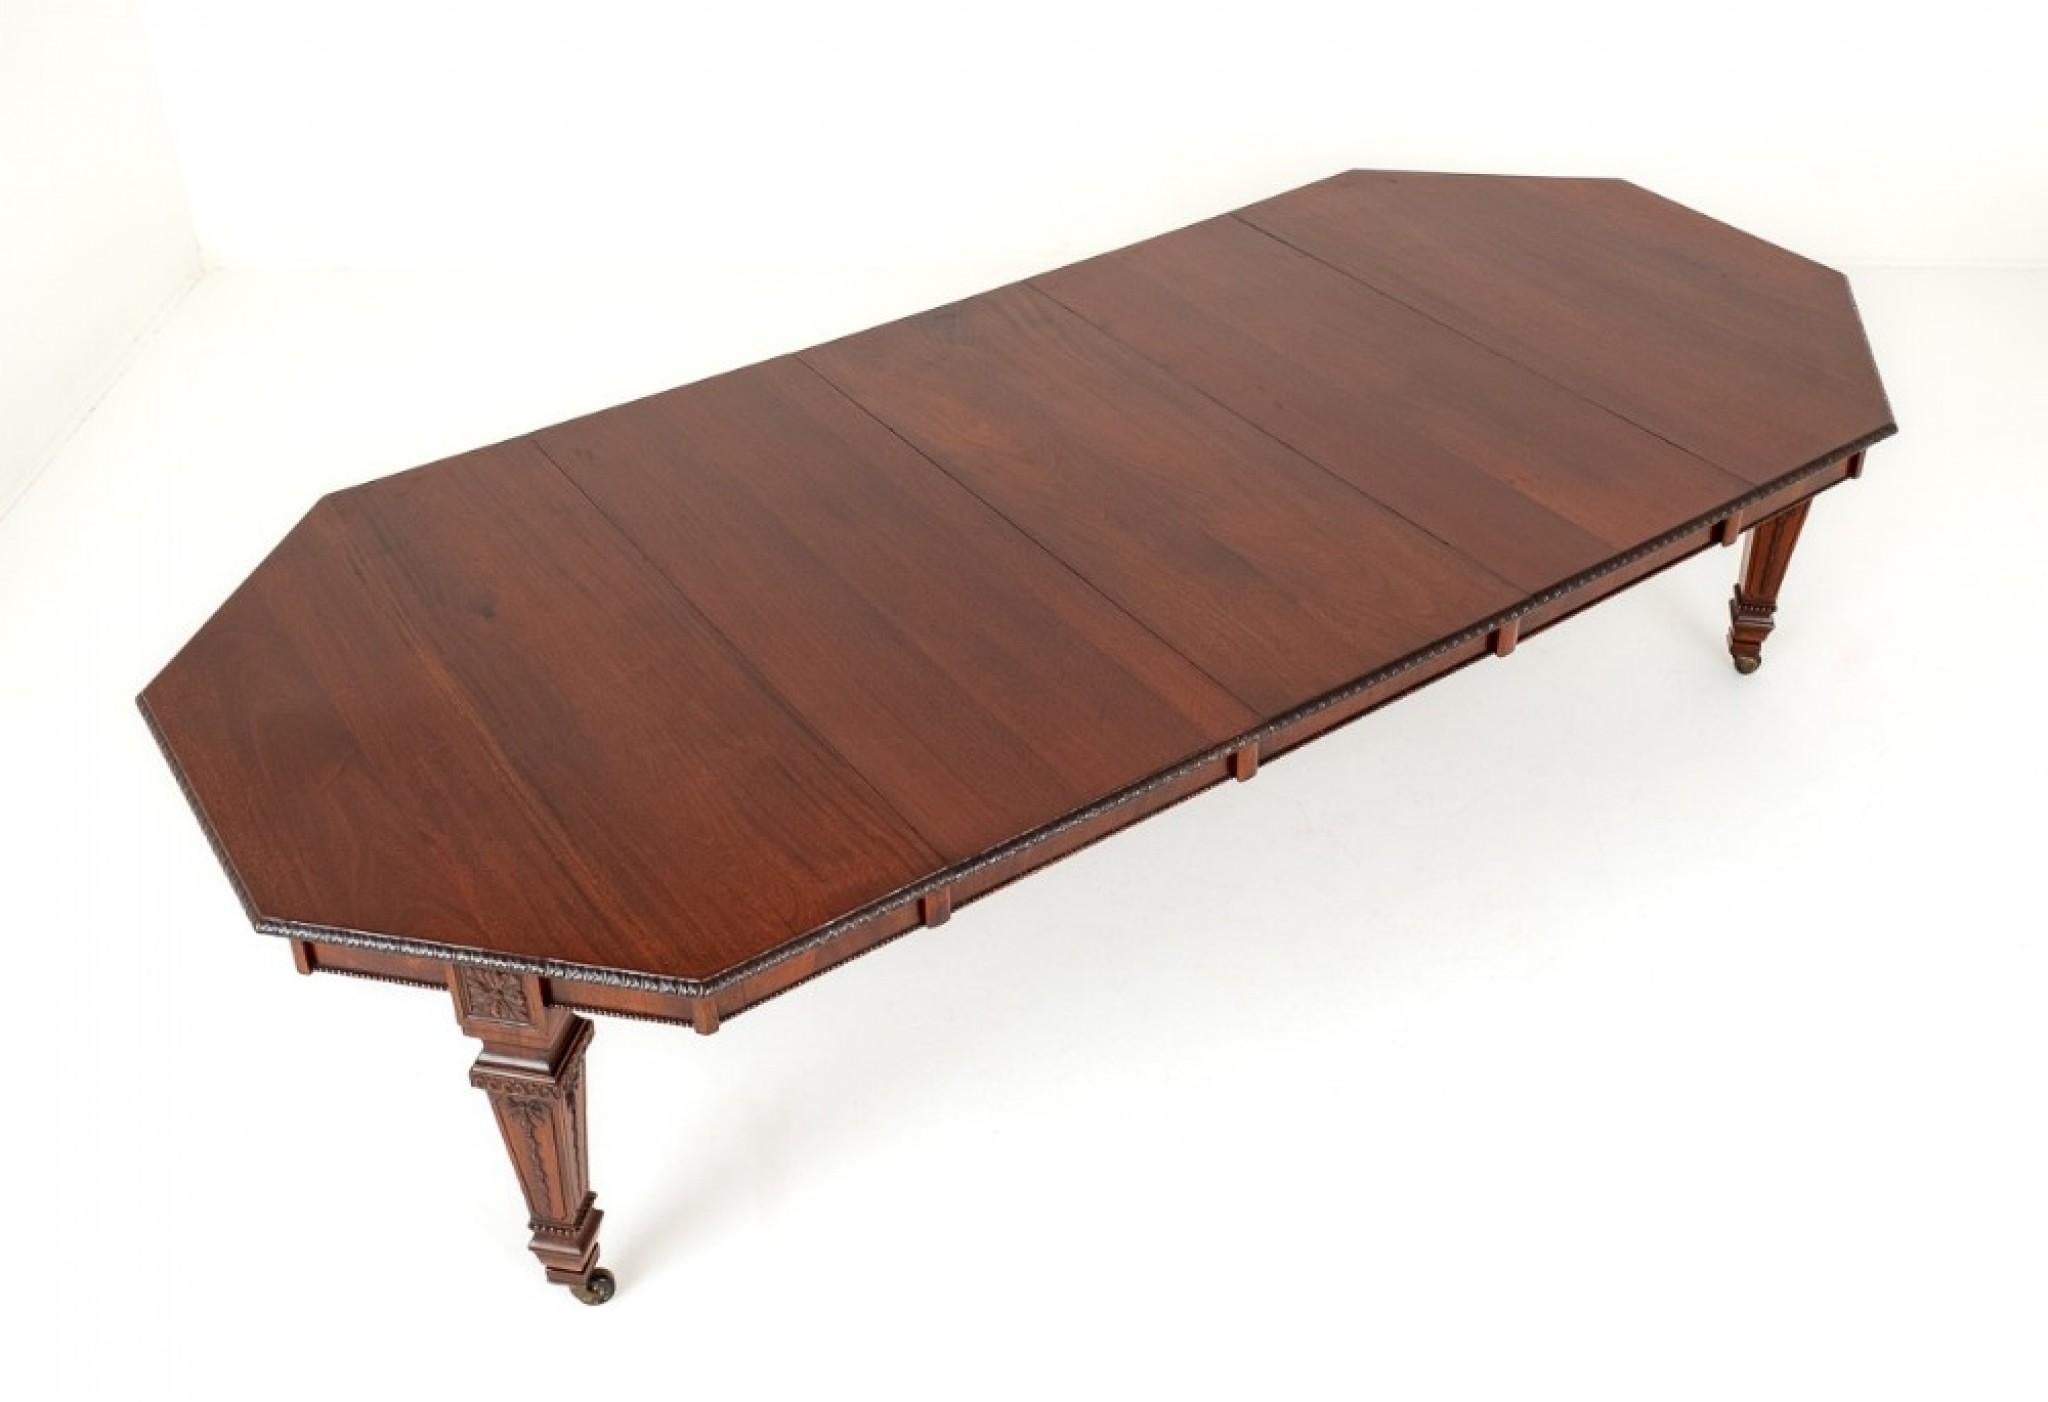 10 - 12 Seater Victorian Octagonal Mahogany Extending Dining Table.
This Table Being of an Unusual Form and Exceptional Quality. Circa 1850
The Table Stands Upon Tapered Legs with Original Brass and Porcelain Castors.
The Legs Feature Carved Detail